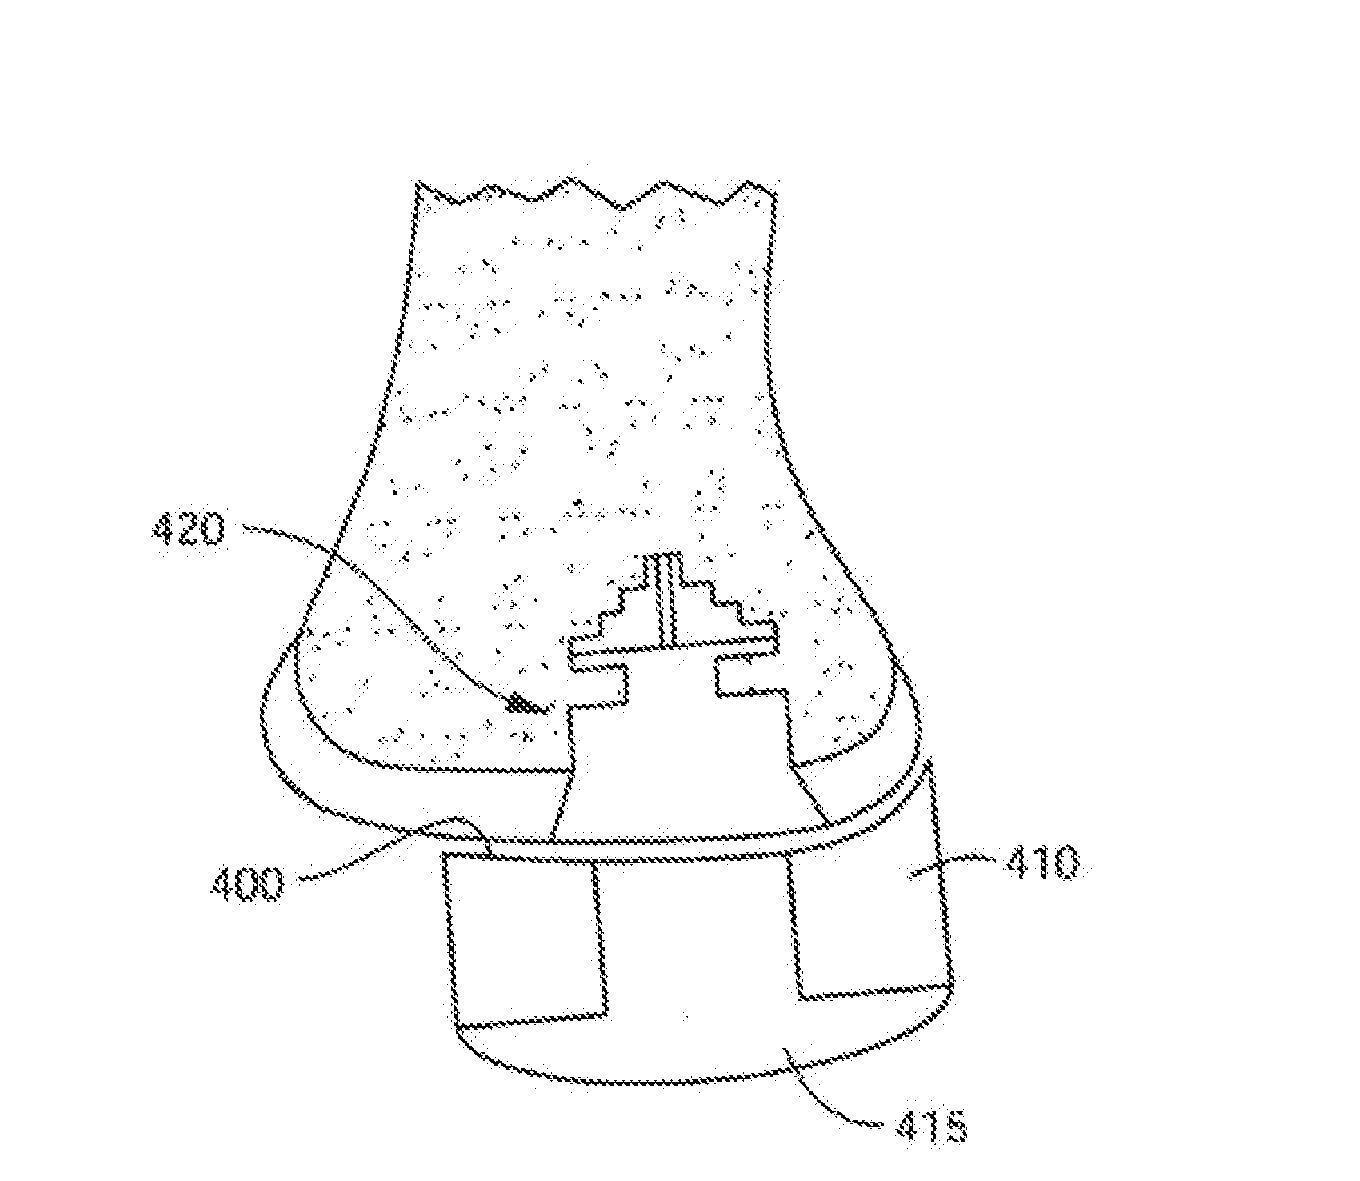 Patient Selectable Joint Arthroplasty Devices and Surgical Tools Incorporating Anatomical Relief